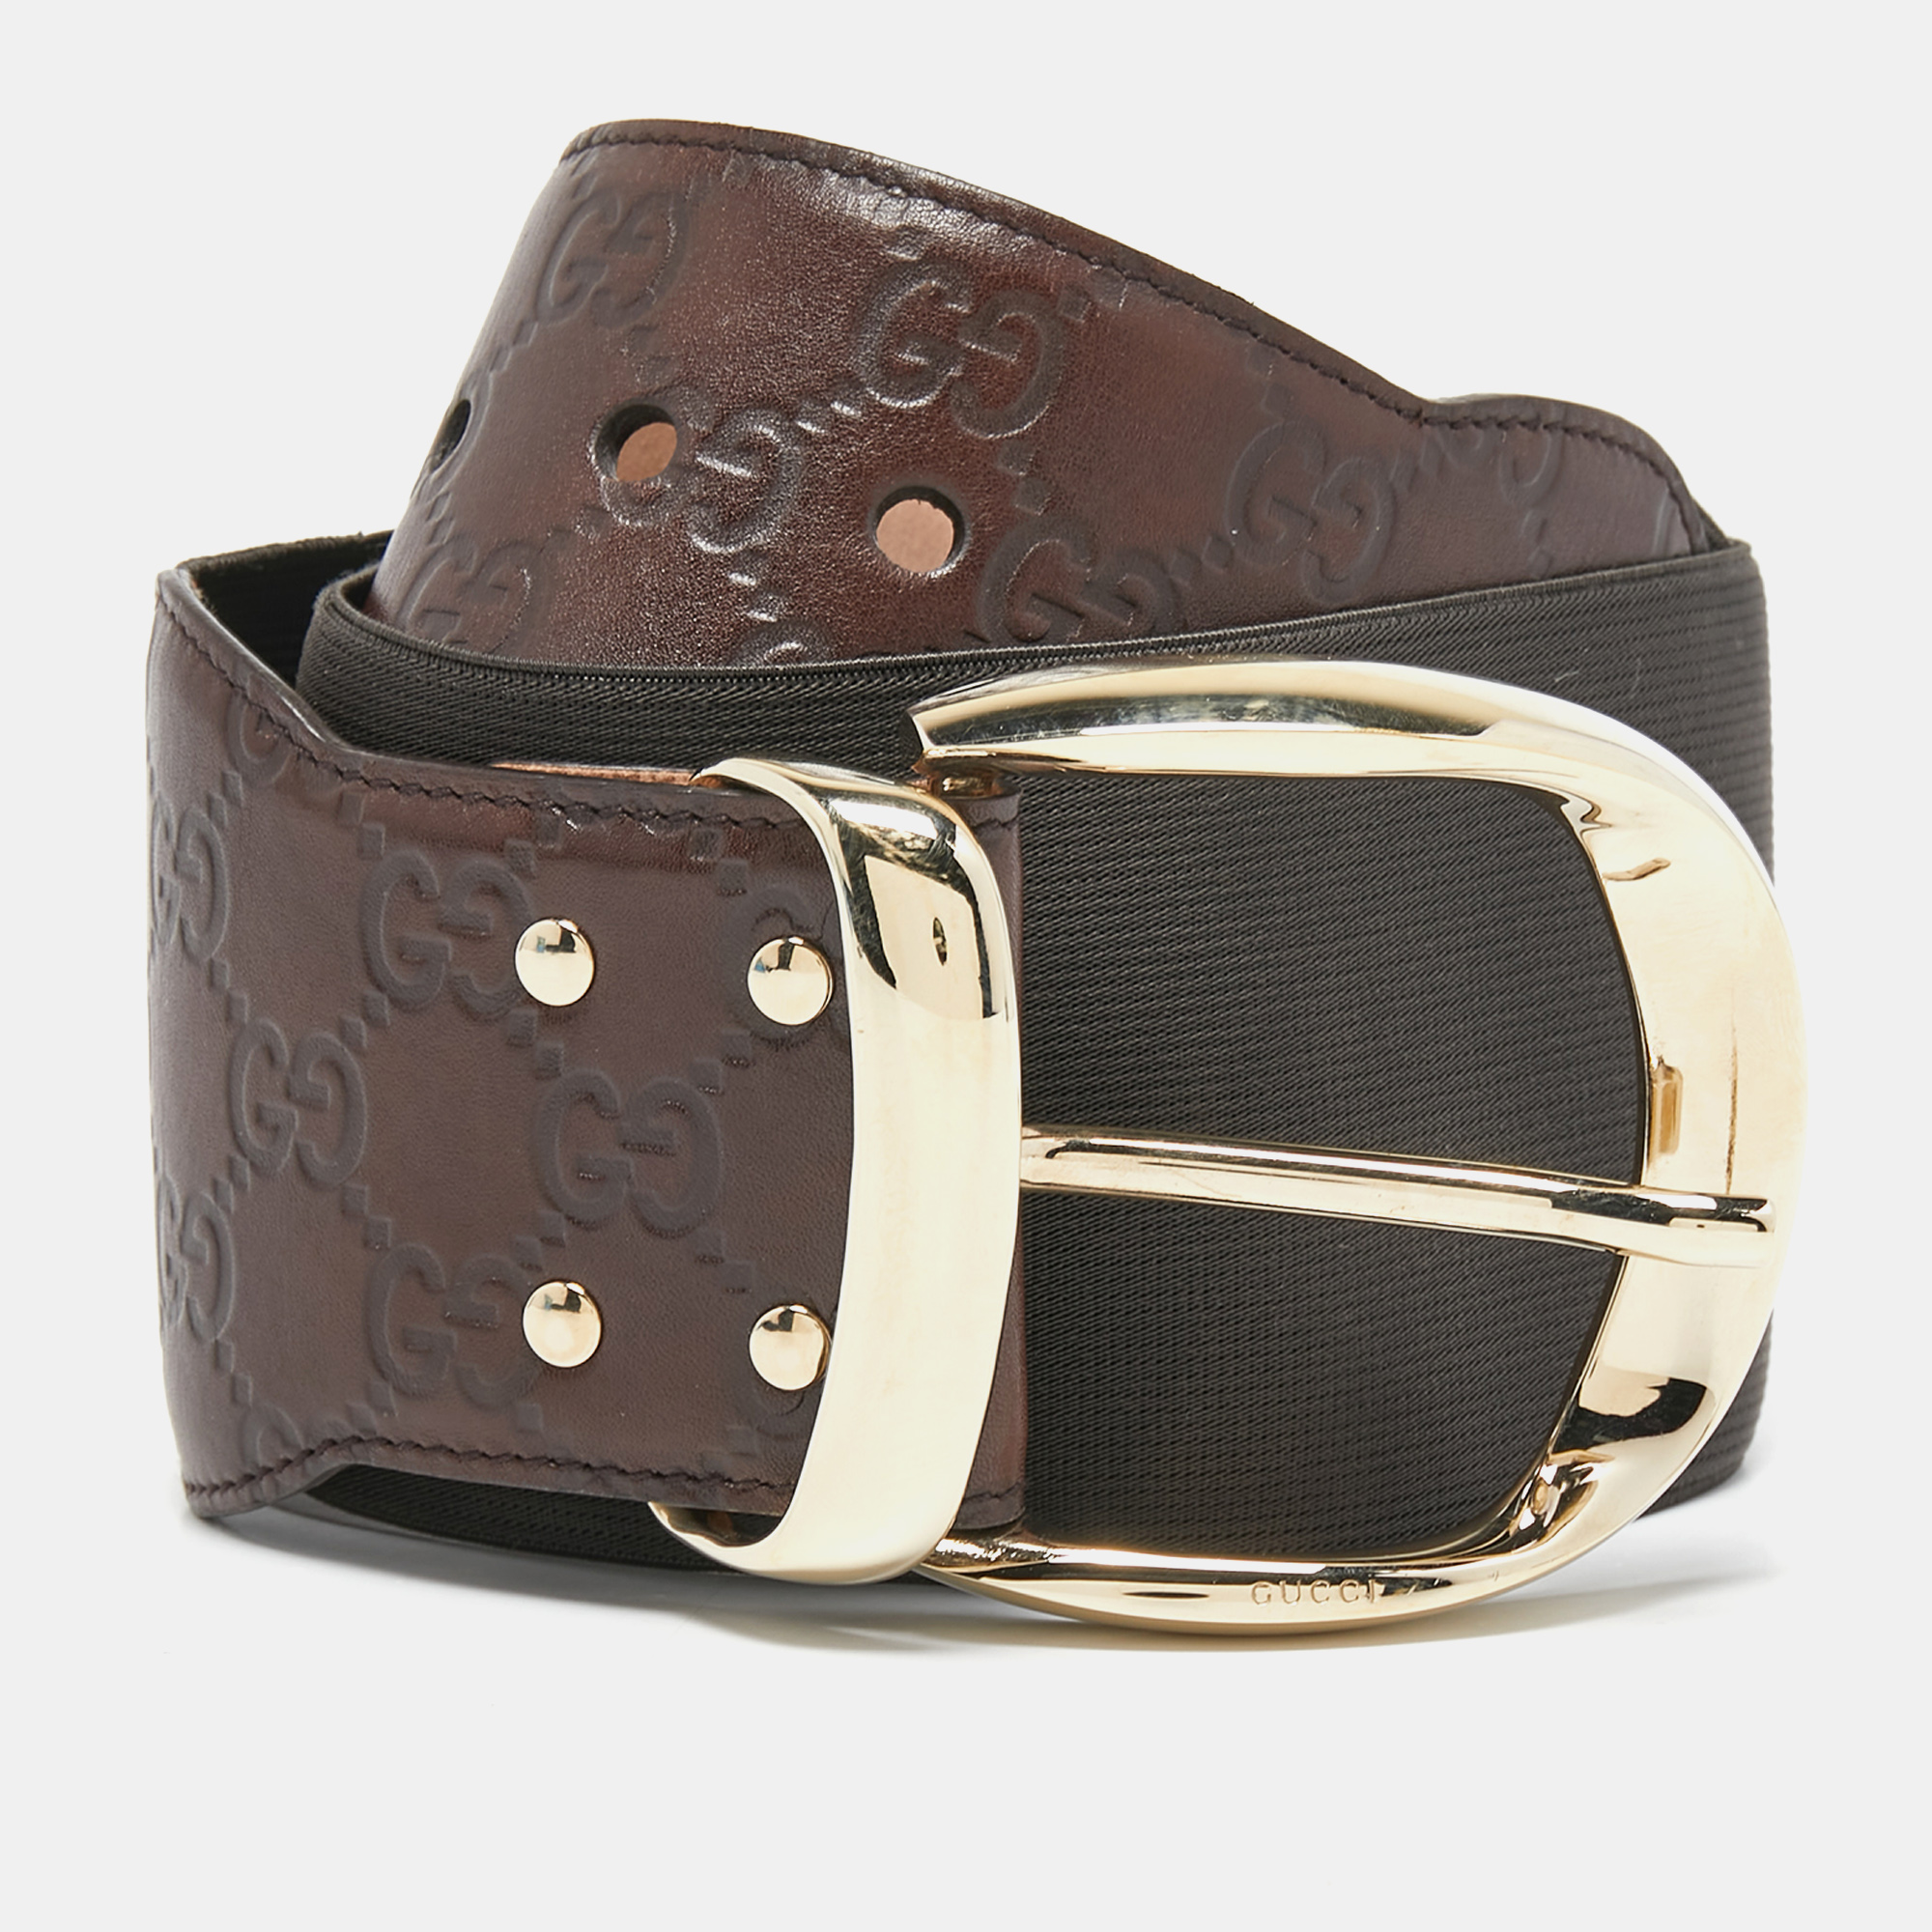 Gucci dark brown guccissima leather and elastic buckle belt 80 cm